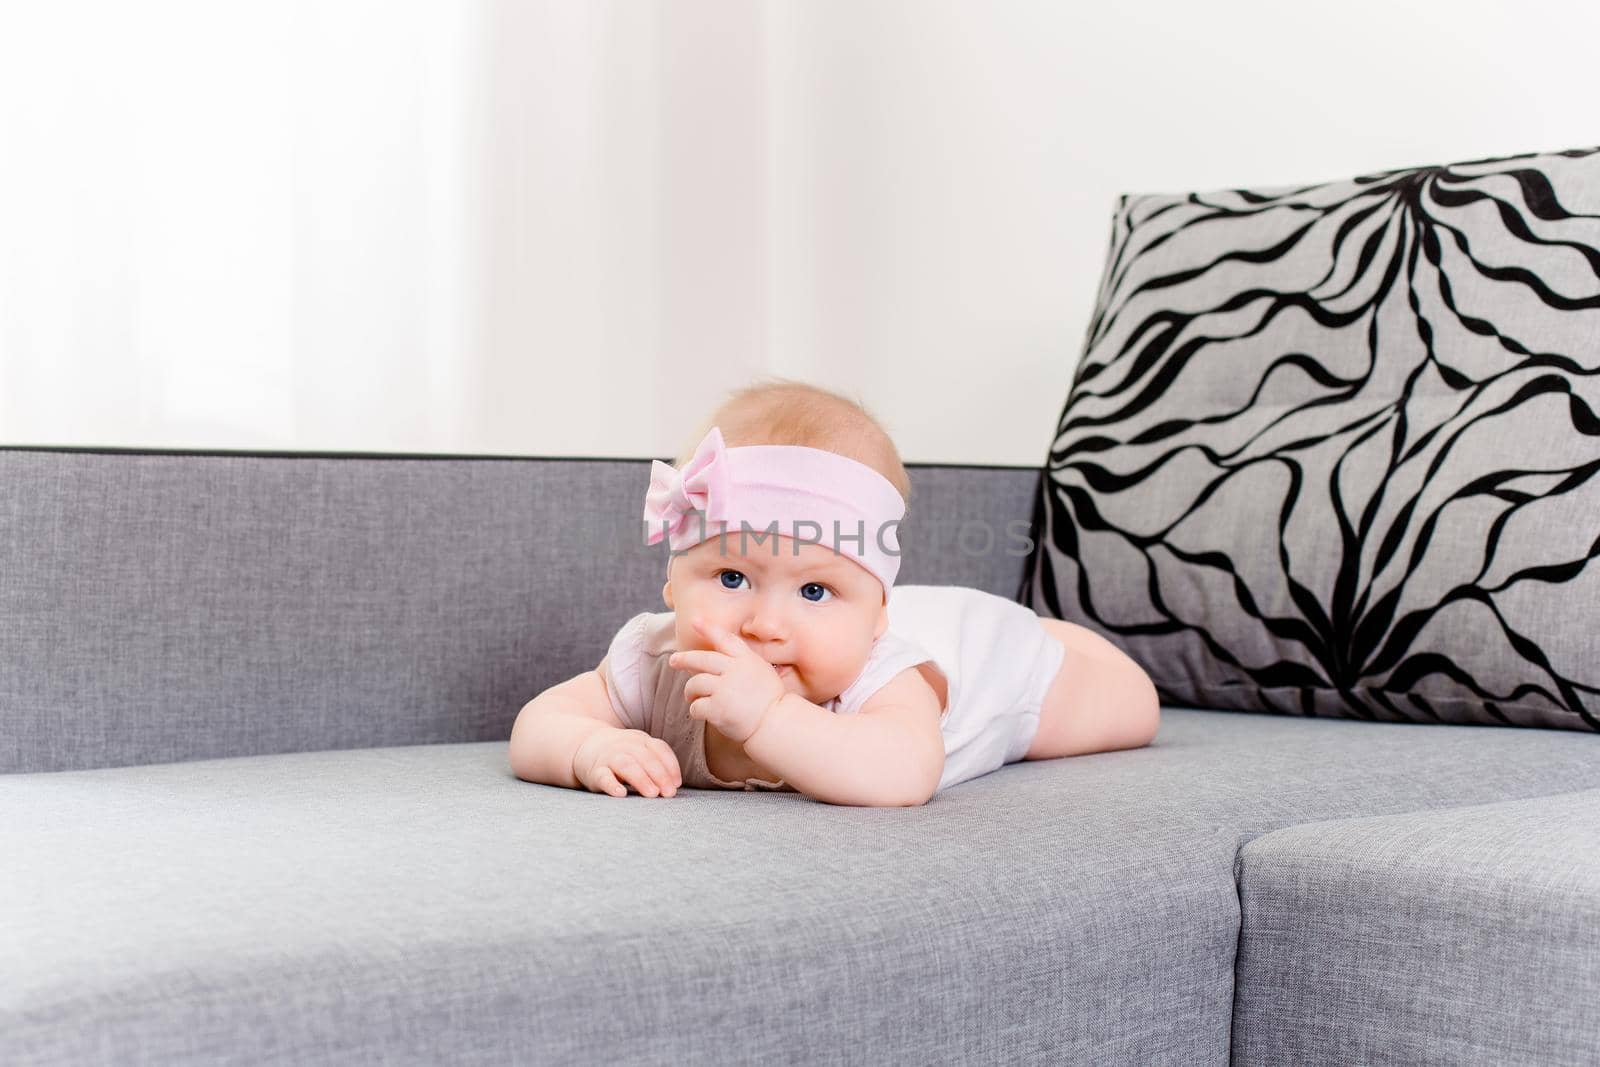 Portrait of a baby girl with a bandage and a bow on her head on a sofa by nazarovsergey